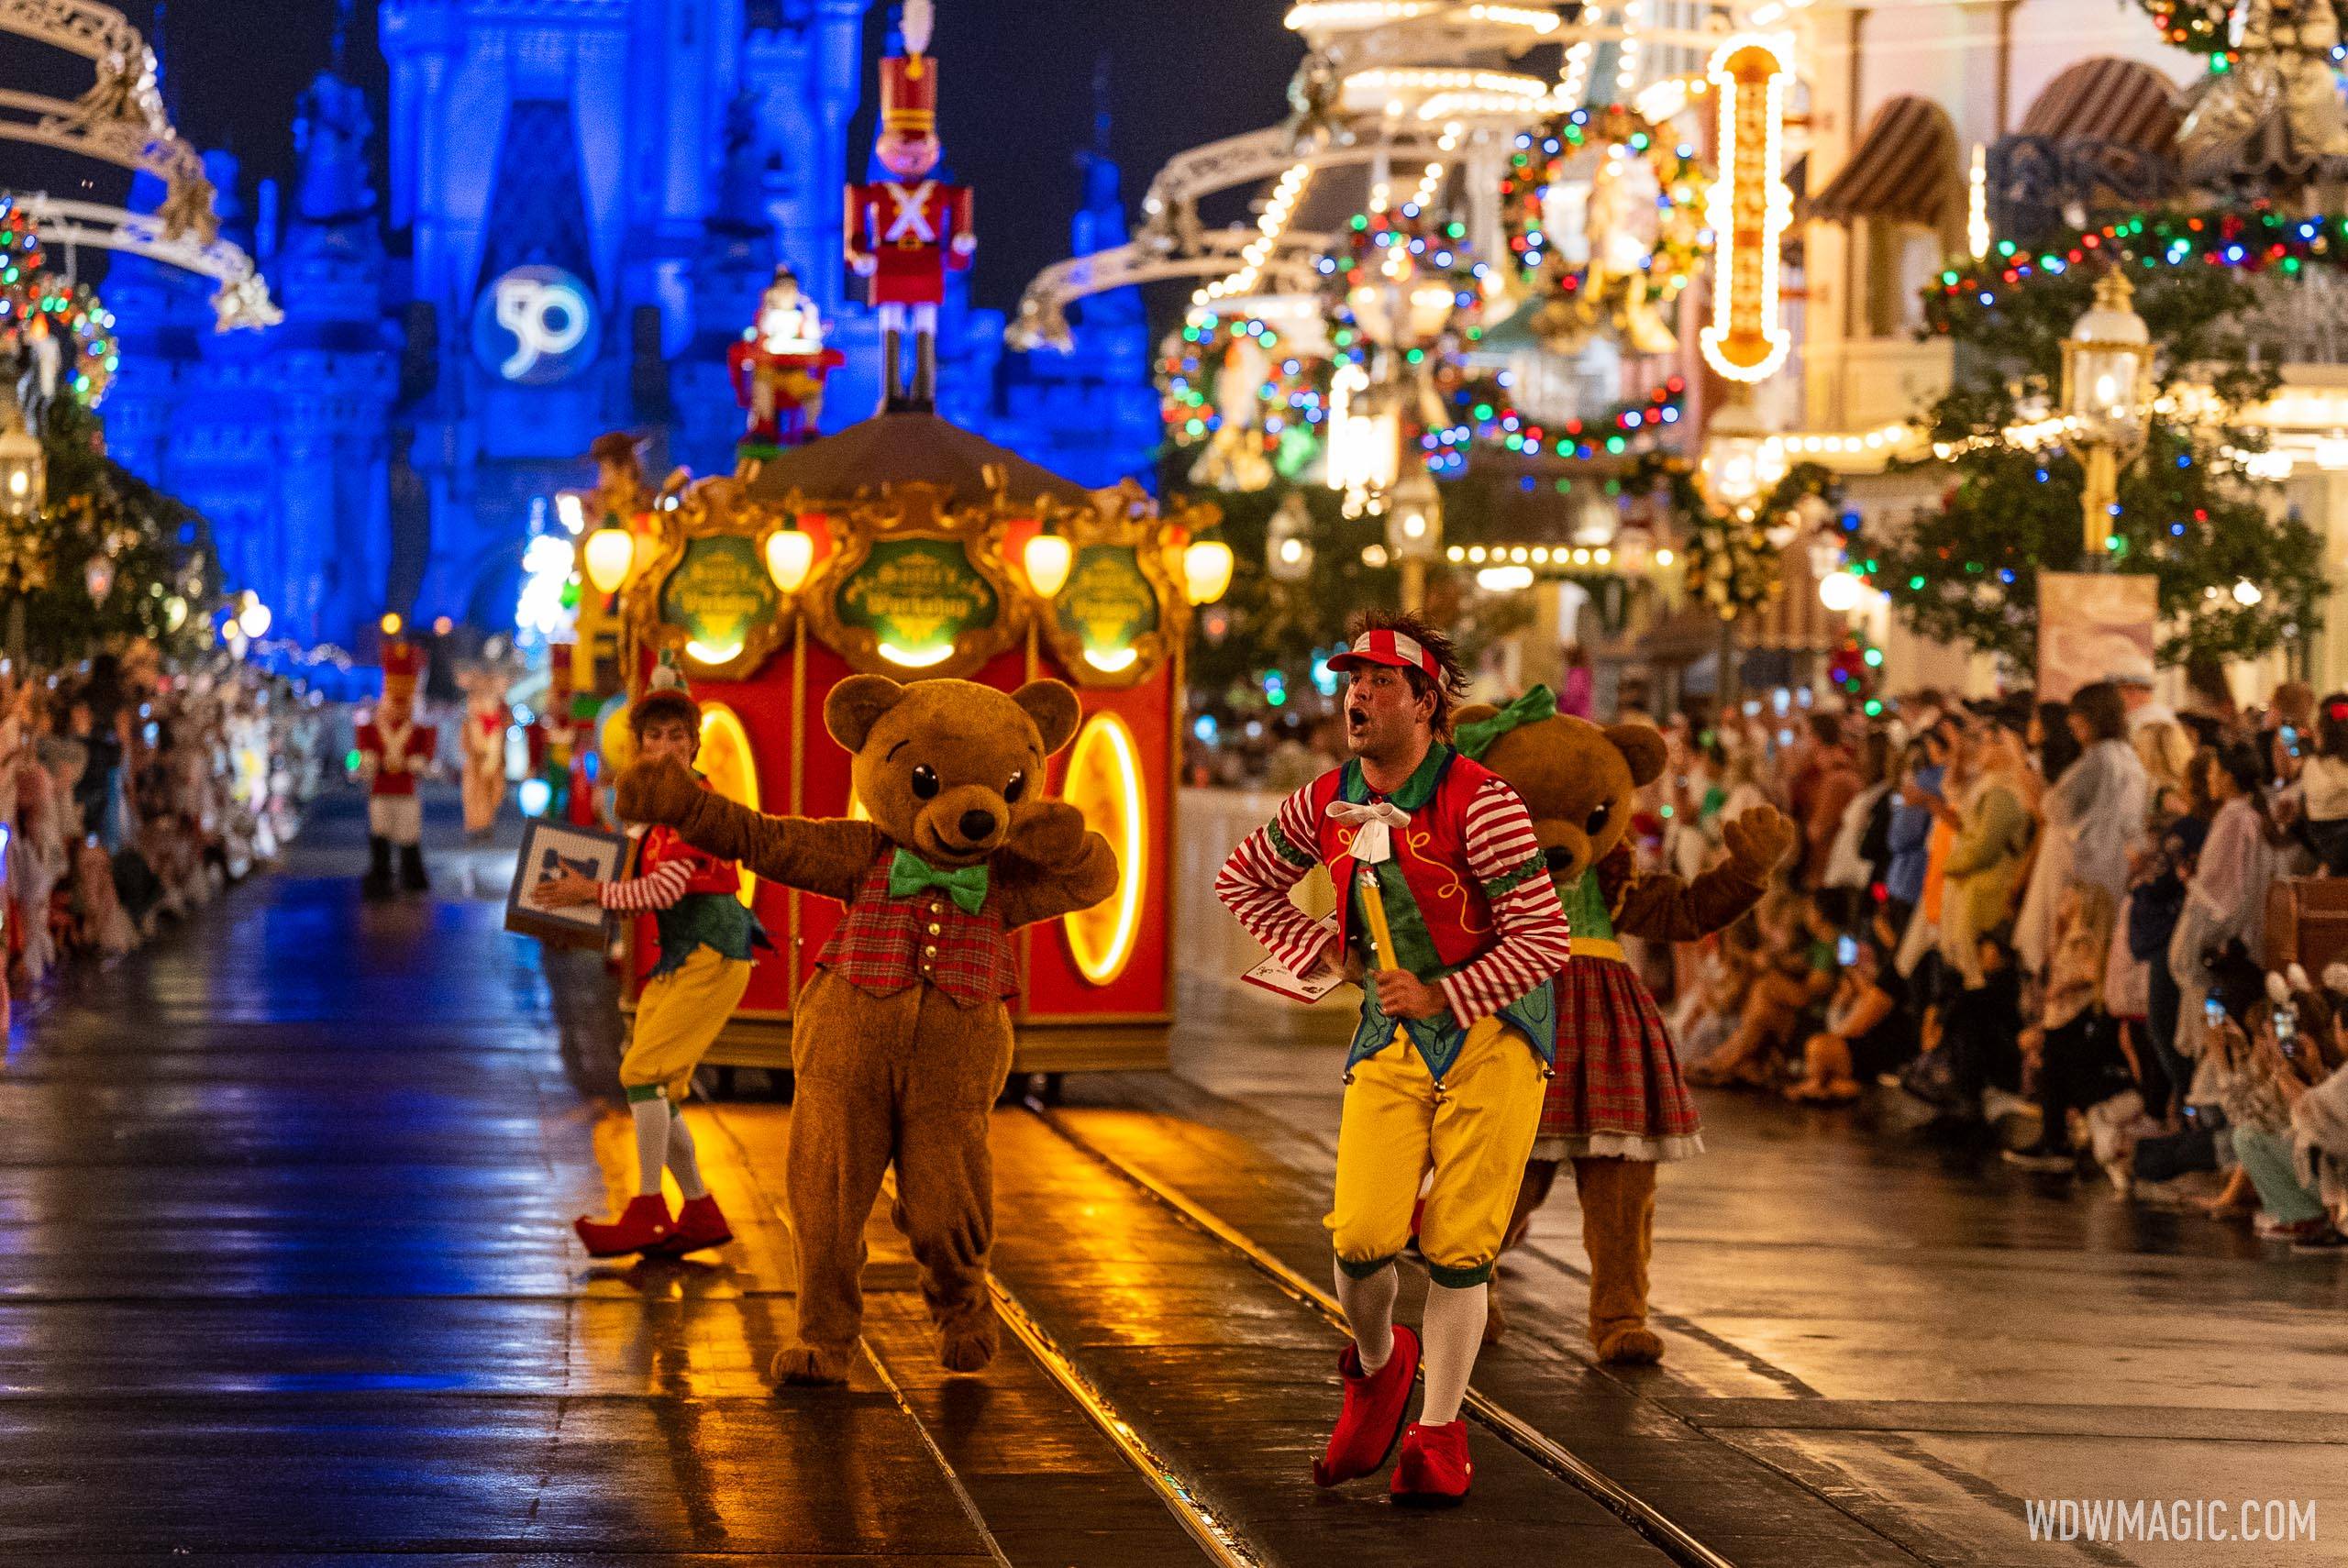 Mickey’s Once Upon a Christmastime Parade to be shown during regular park hours from Dec 19th to Dec 31st 2009